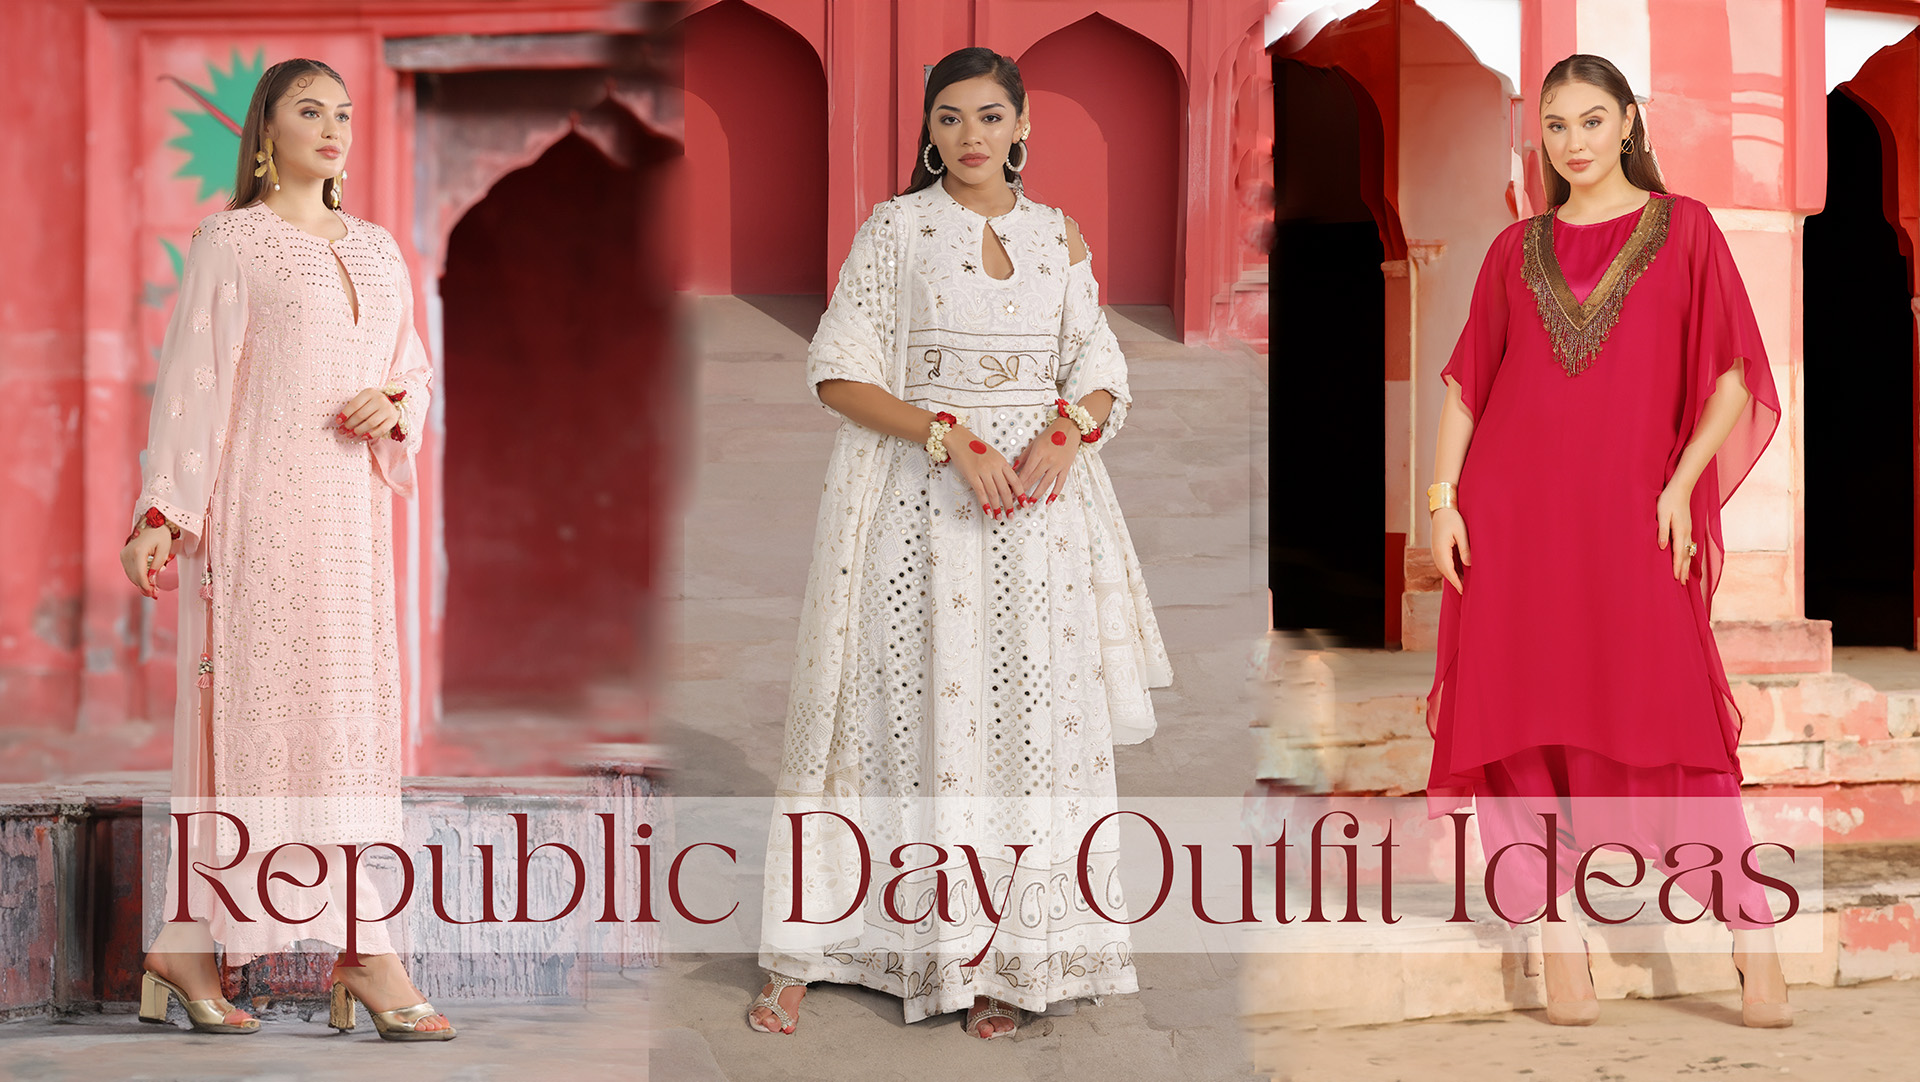 Best Republic Day Outfit Ideas for a Stylish Celebration